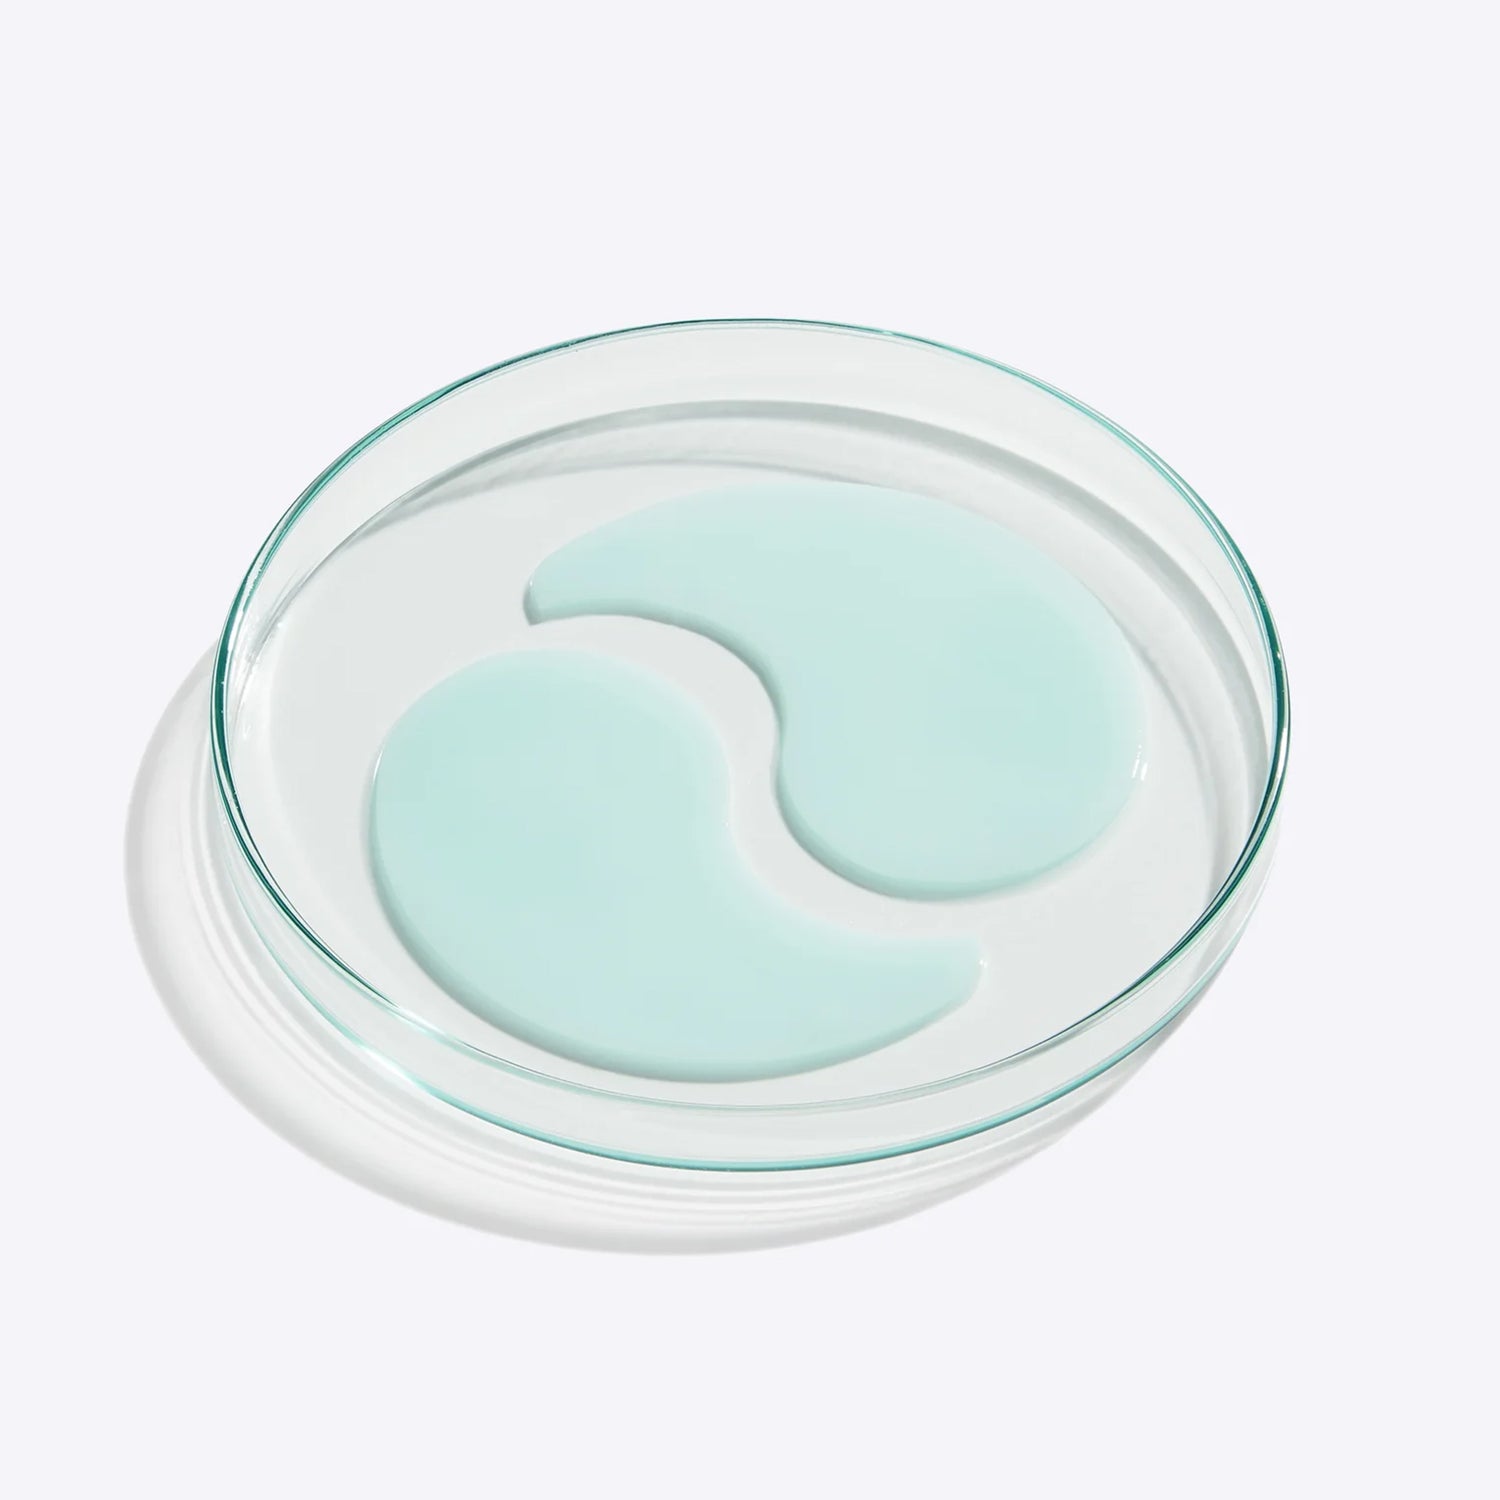 Hyaluronic Fix Extreme4 Jelly Eye Patches